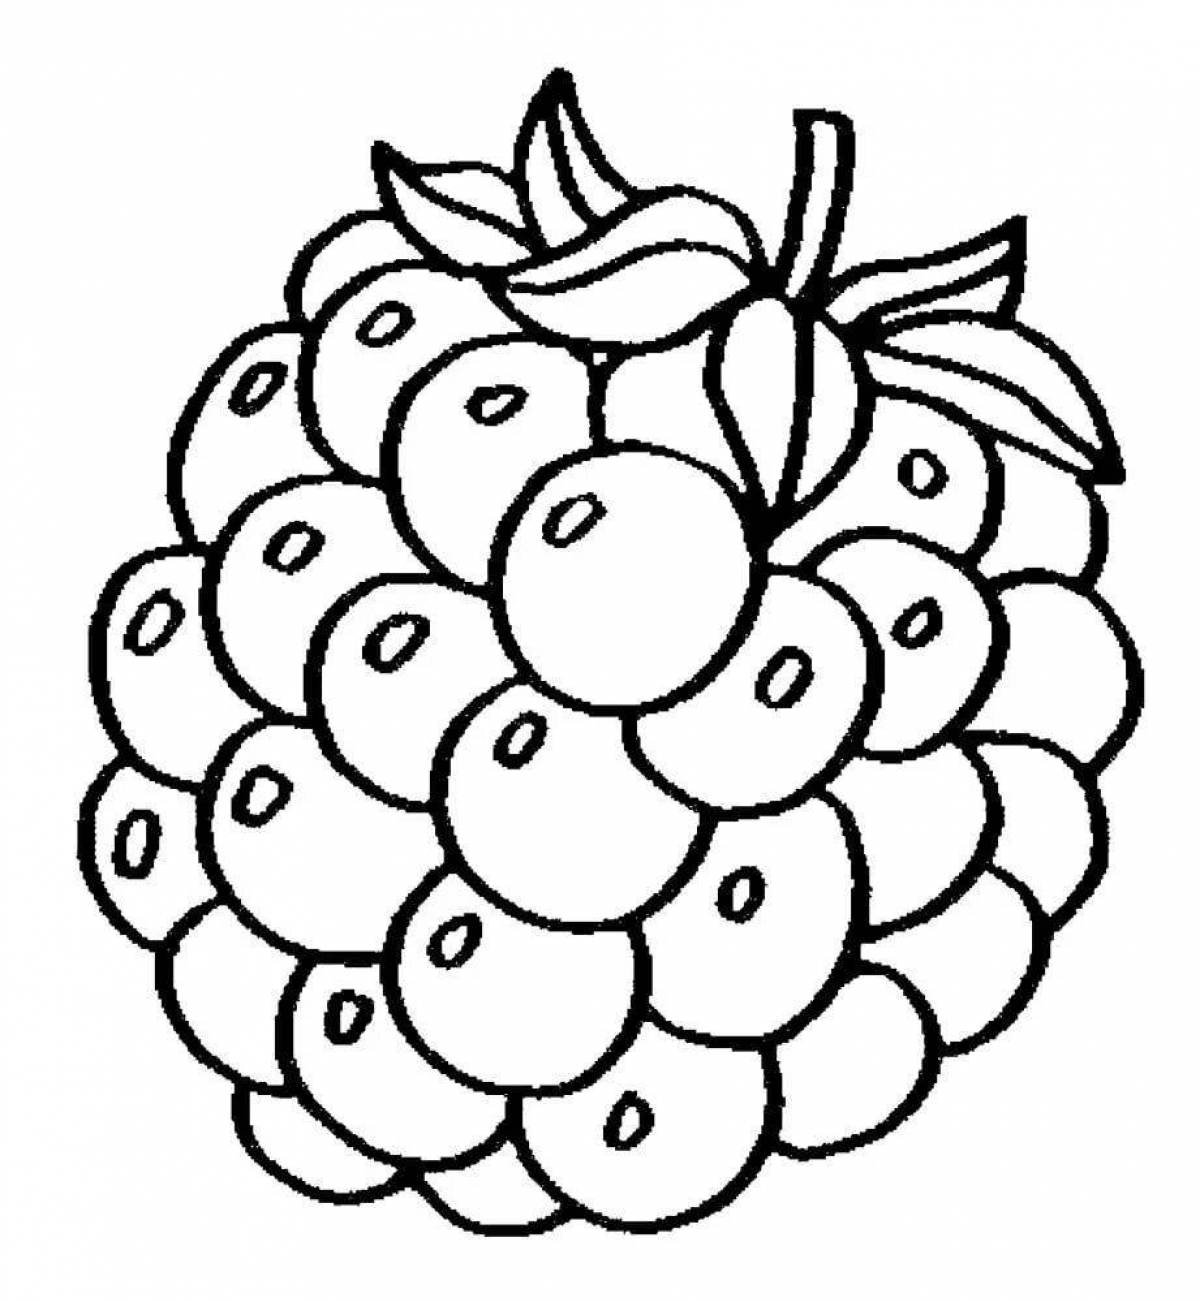 Wonderful berries and fruits coloring pages for kids